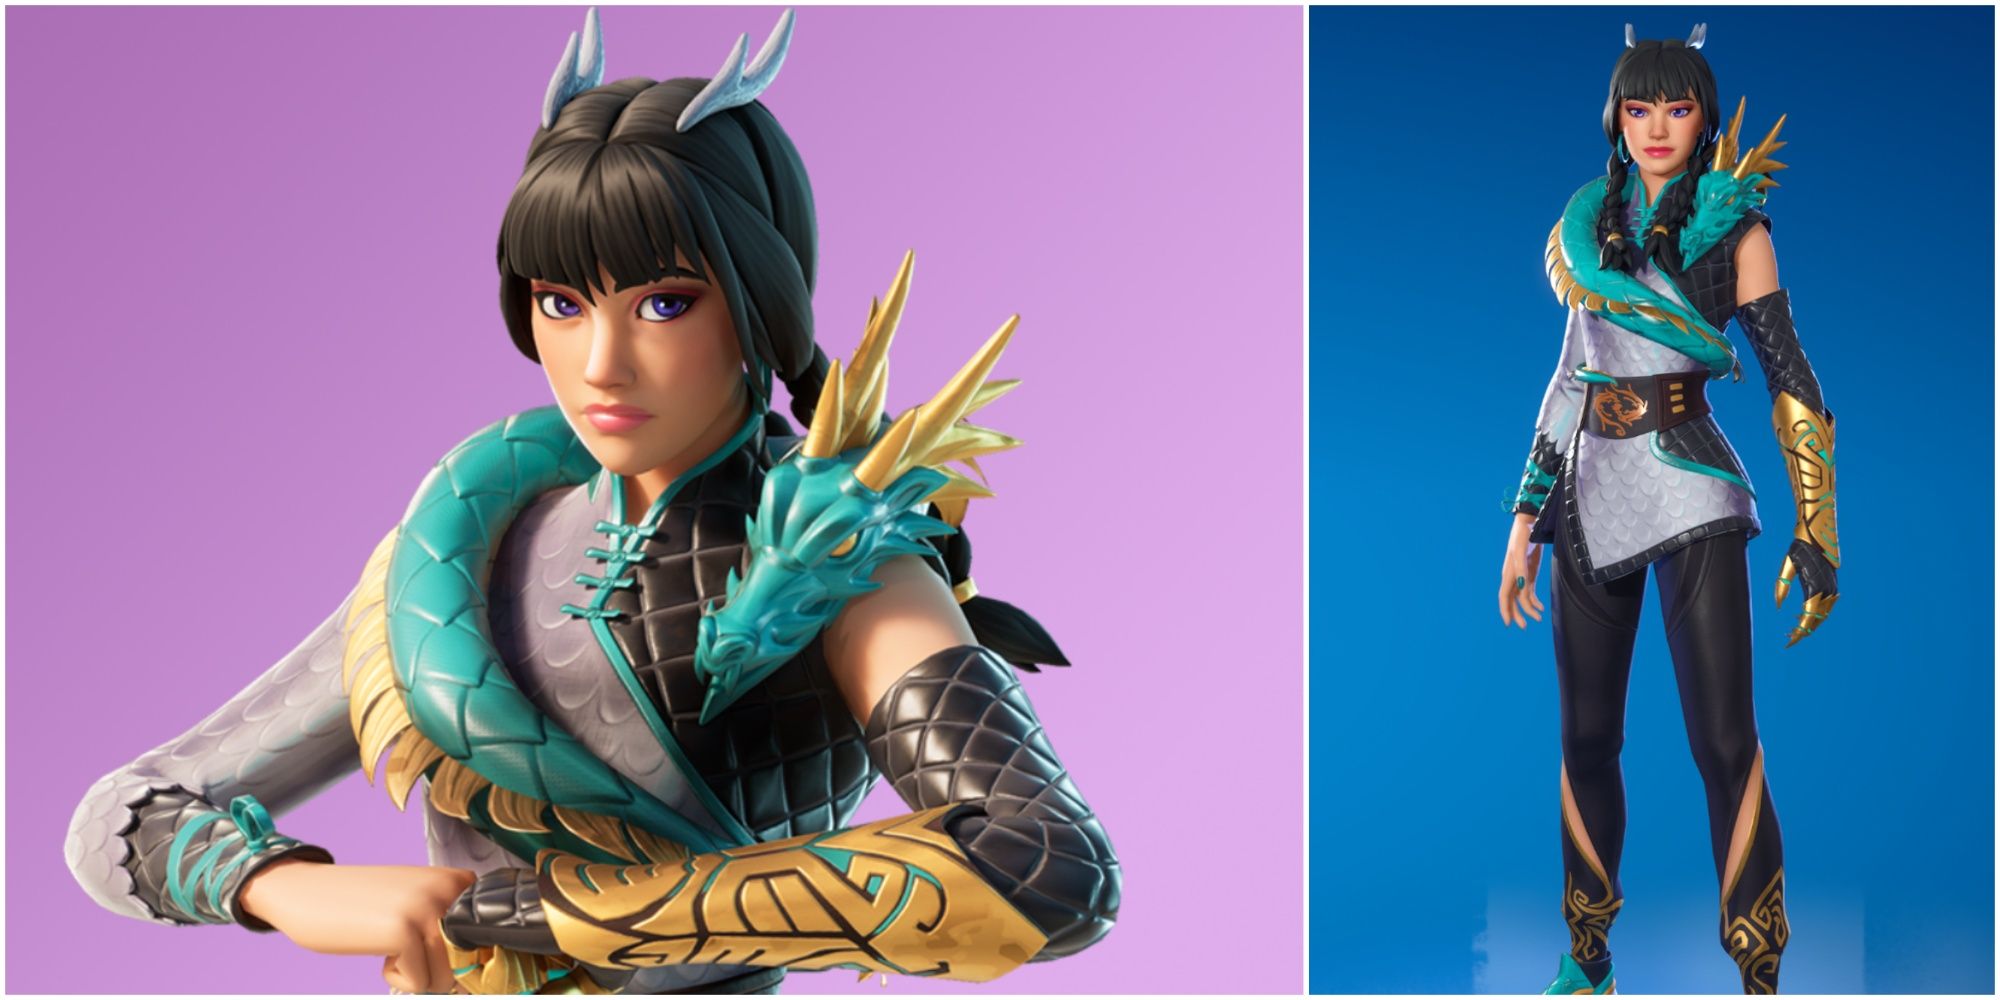 lin promo image and lin in-game